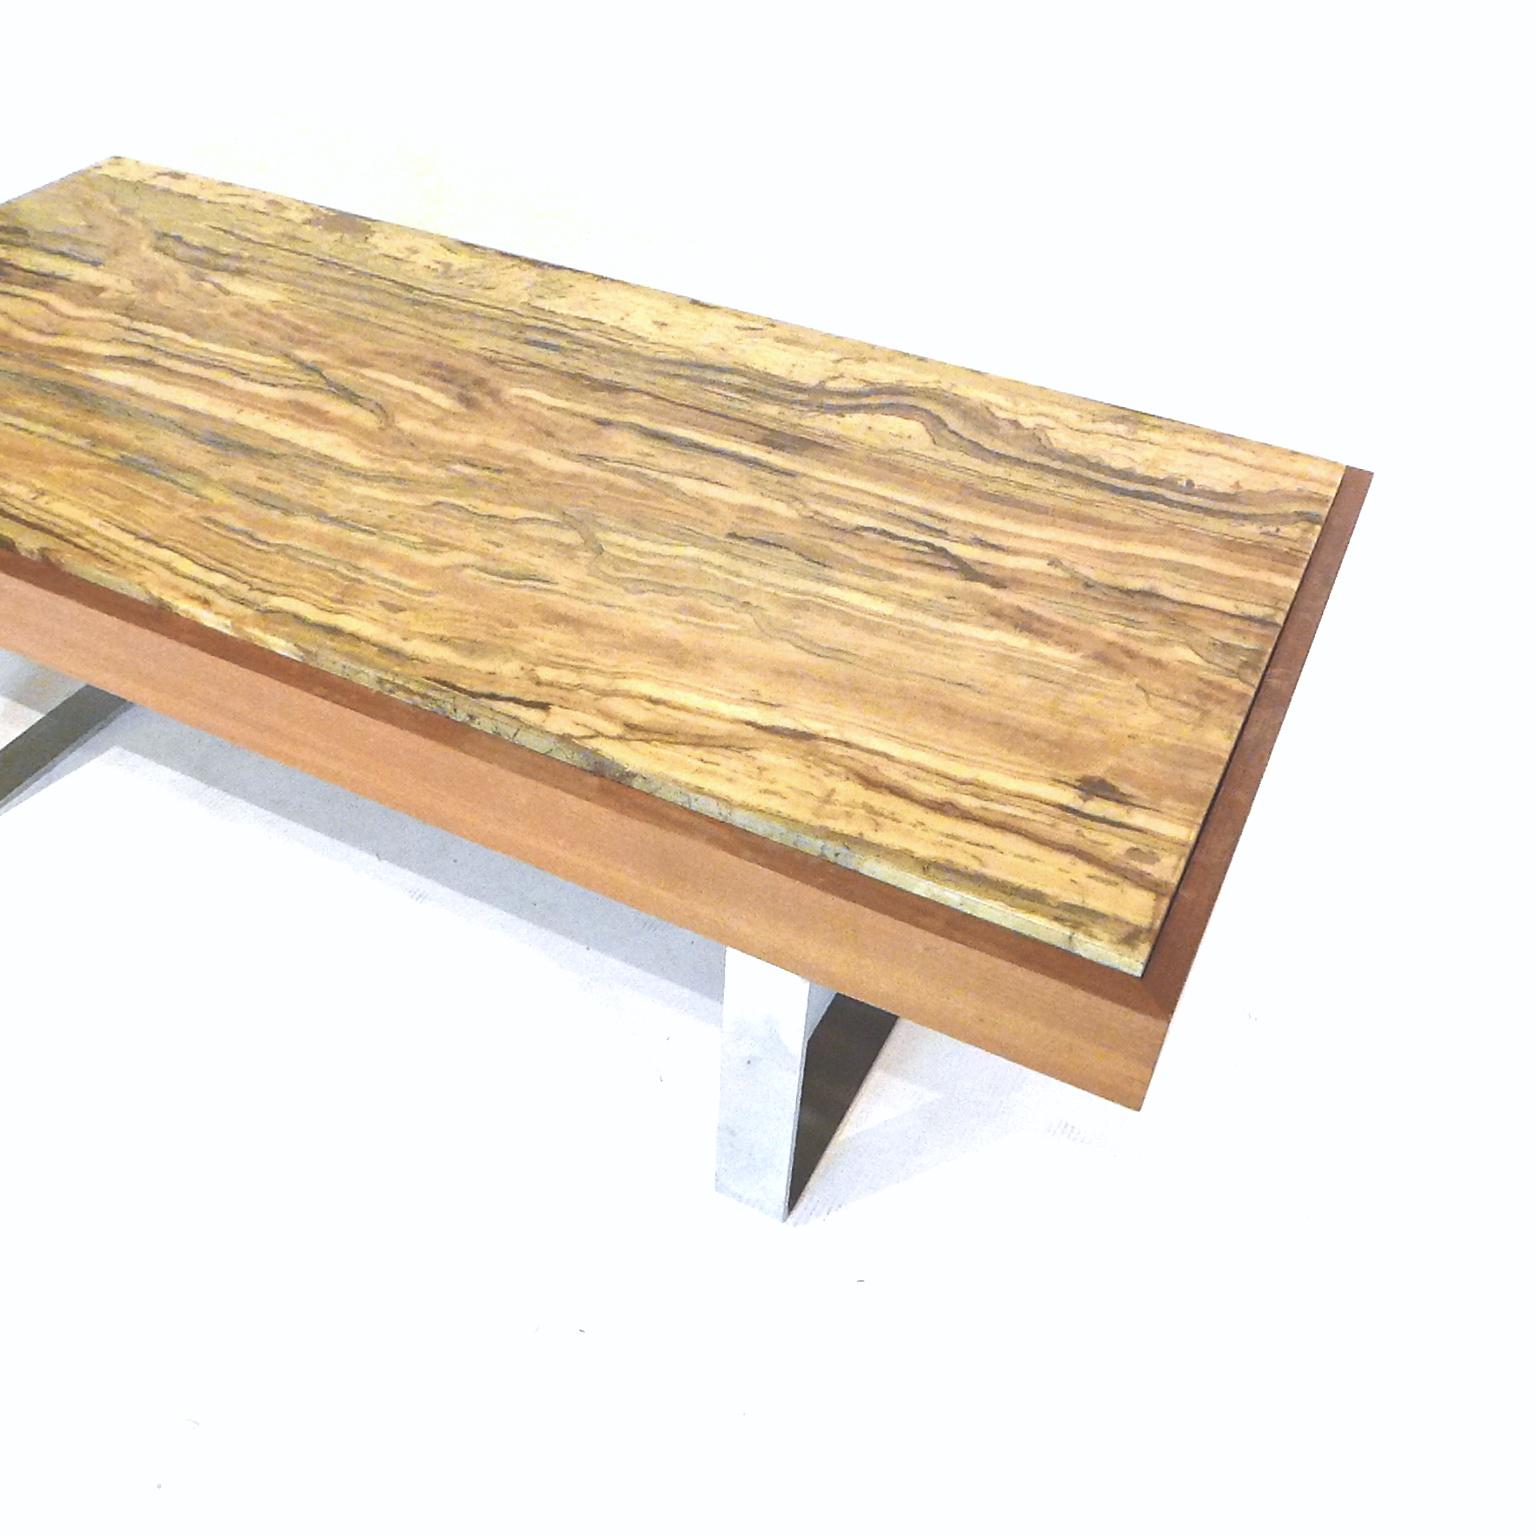 Ilse Möbel Coffee Table with Rare 'Onyx Travertine', Teak & Chrome from Germany 1